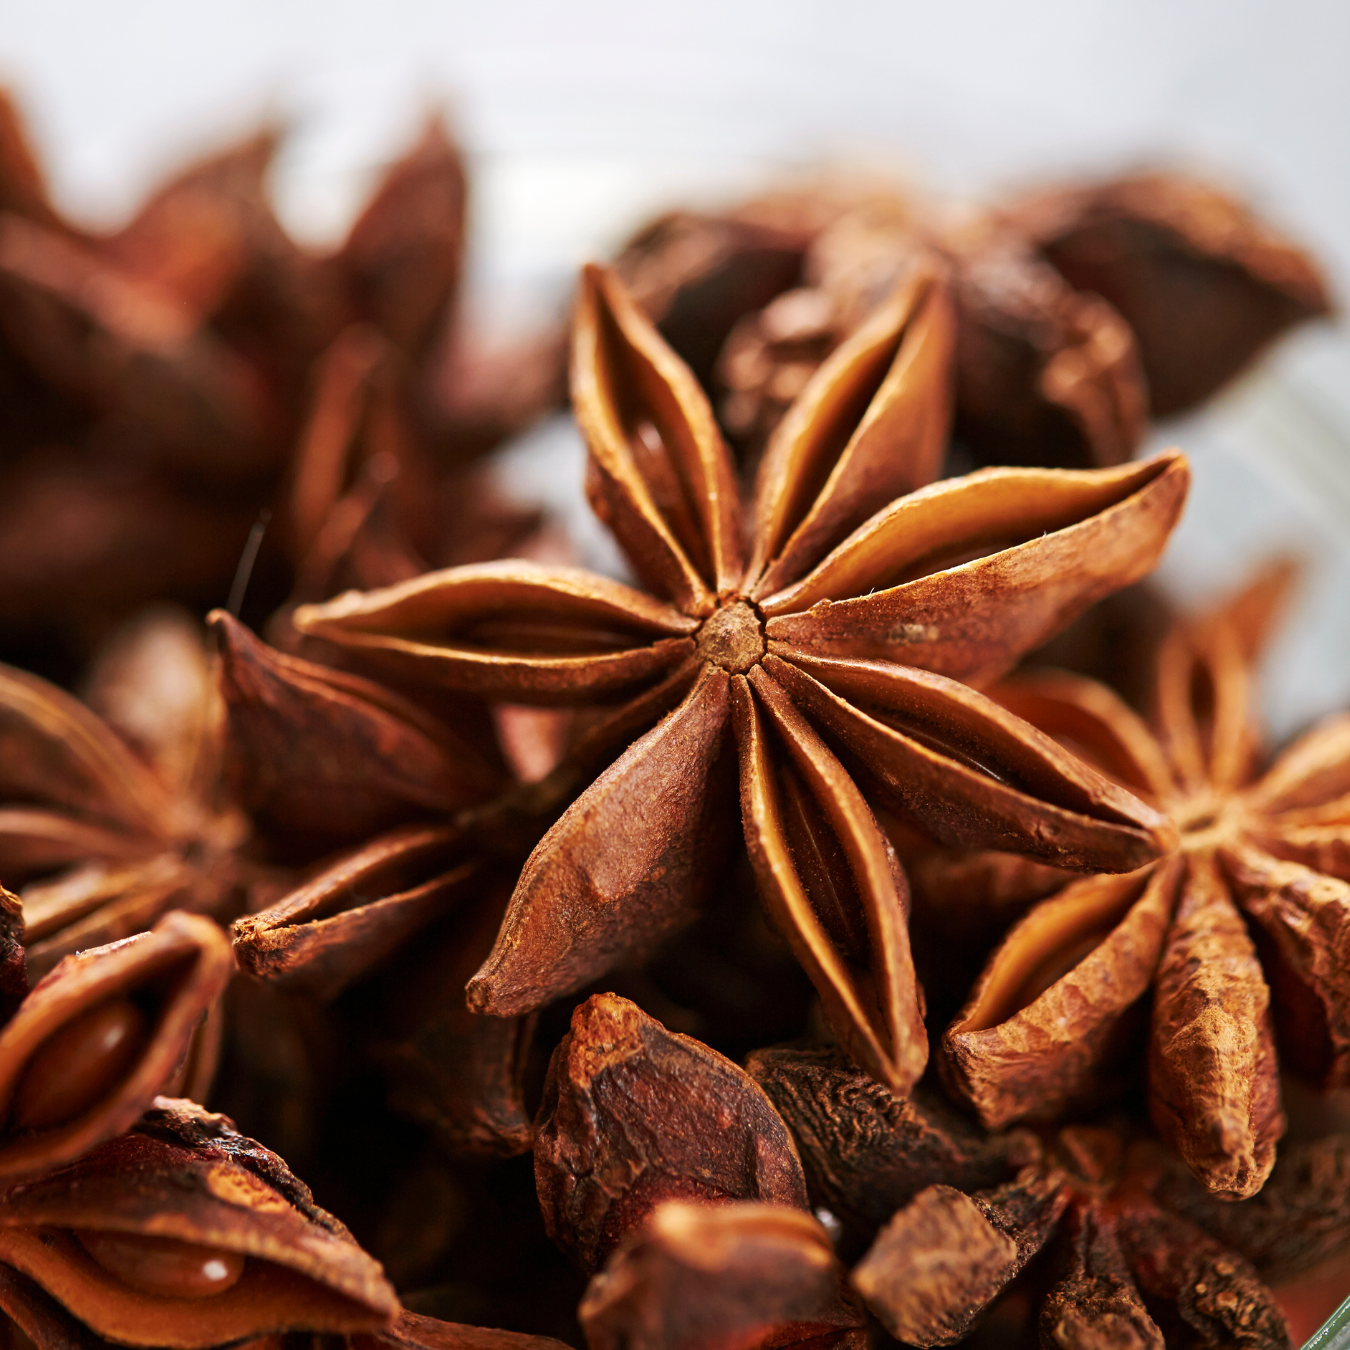 Organically Grown Star Anise (Chakra Phool) | Premium Export Quality and Natural Flavor